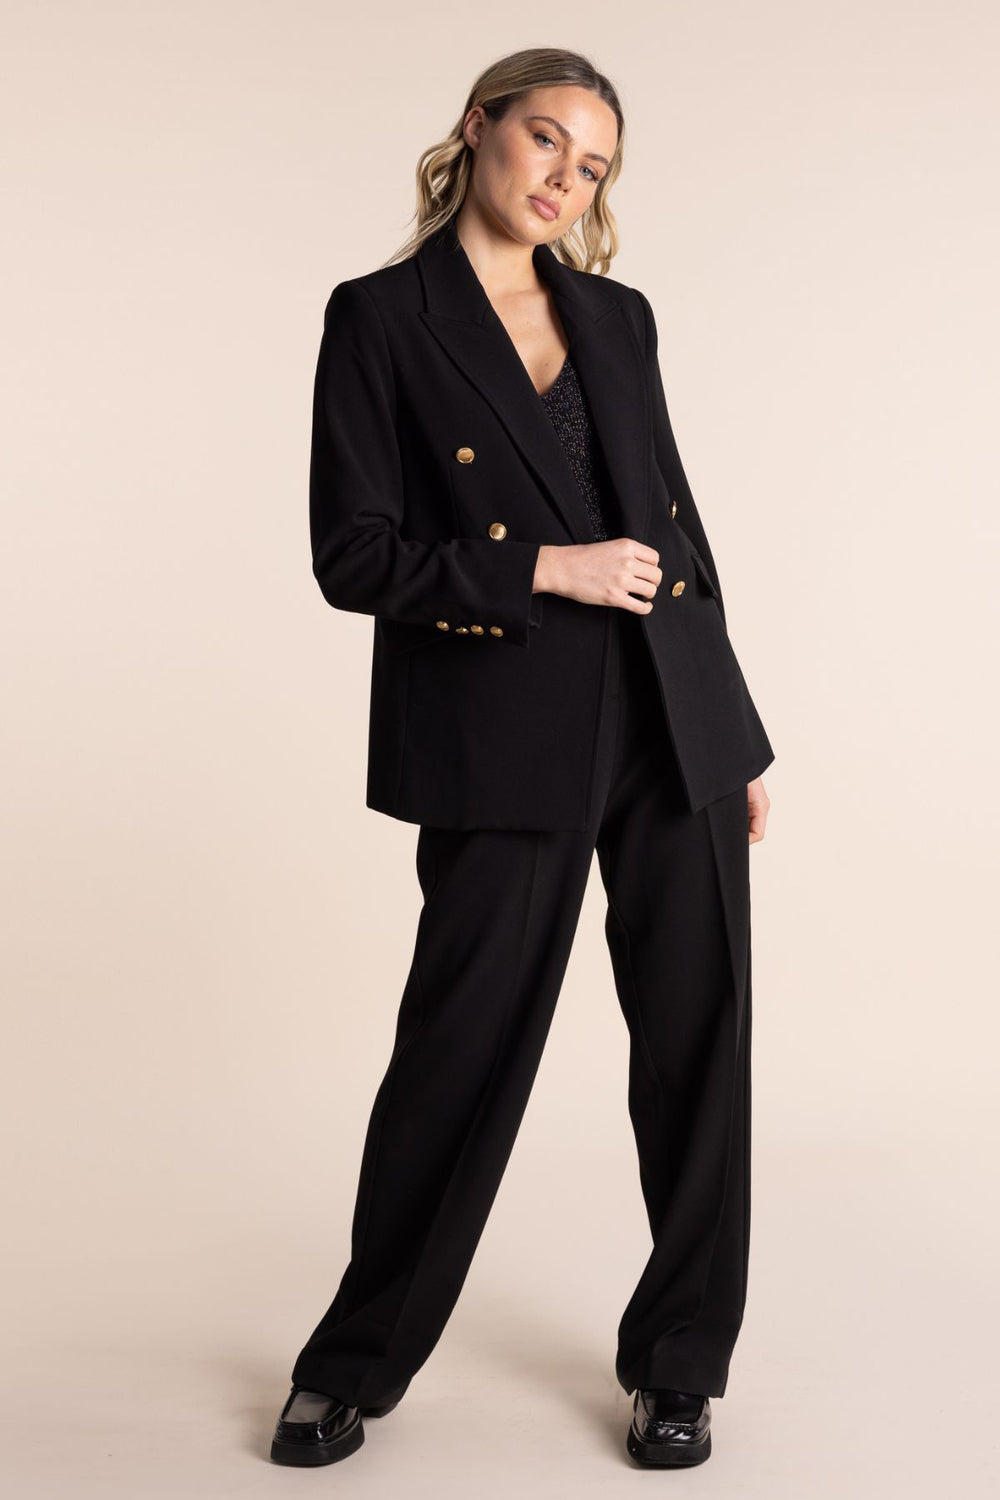 The Trinity Blazer by designer Two T's is a lux wardrobe staple. This classic blazer is comfortable and stylish. Featuring gold buttons, two front faux pockets and a classic lapel.   Brand : Two T's  Style code : 2555 Colour : 2555 Fabric : Main - 96% Polyester 4% Elastane  Lining - 97% Polyester 3% Elastane Dry clean recommended or hand wash  Lined